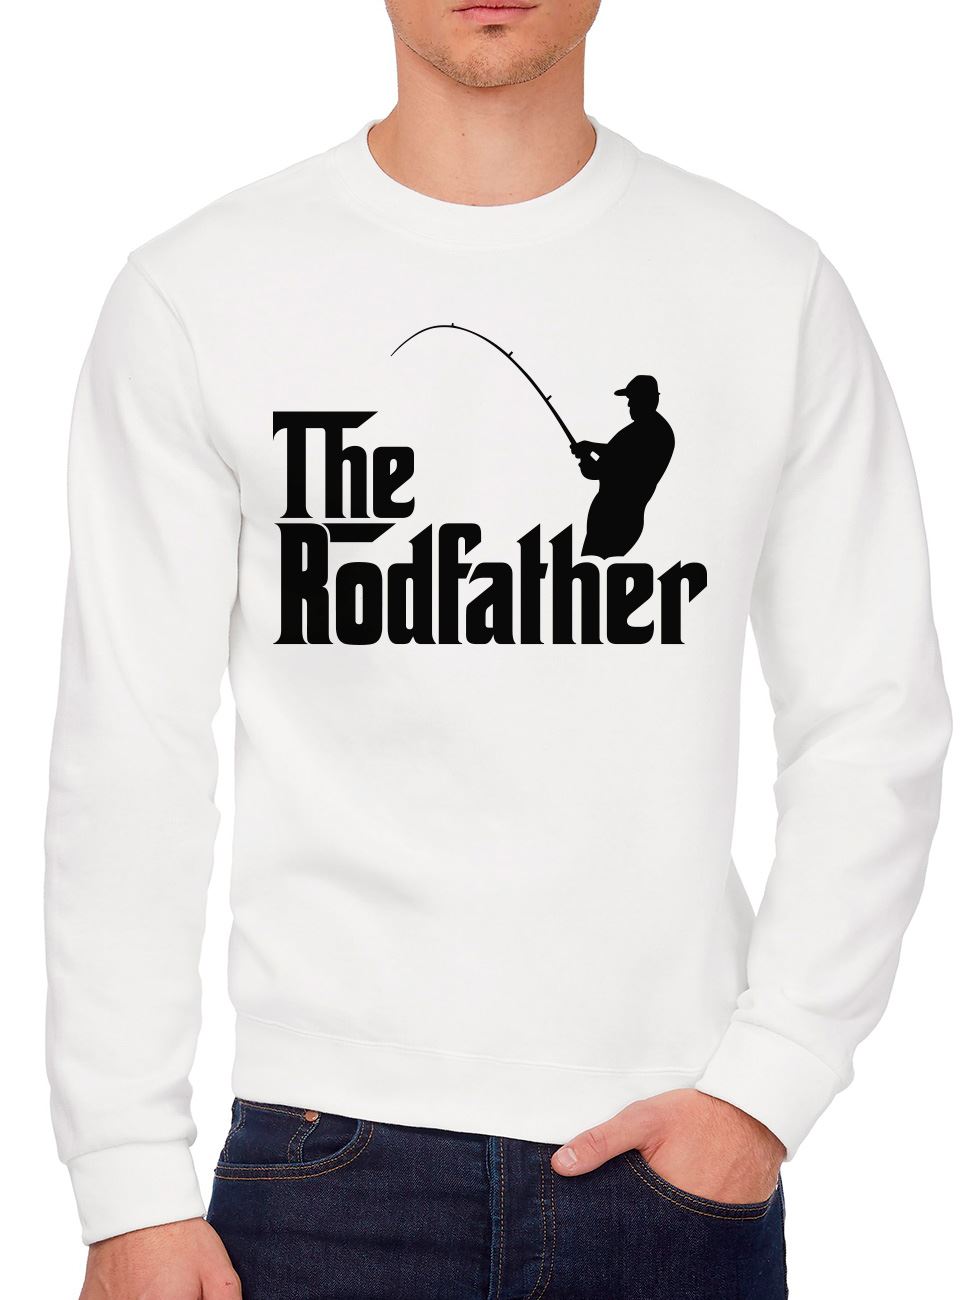 The Rodfather - Youth & Mens Sweatshirt